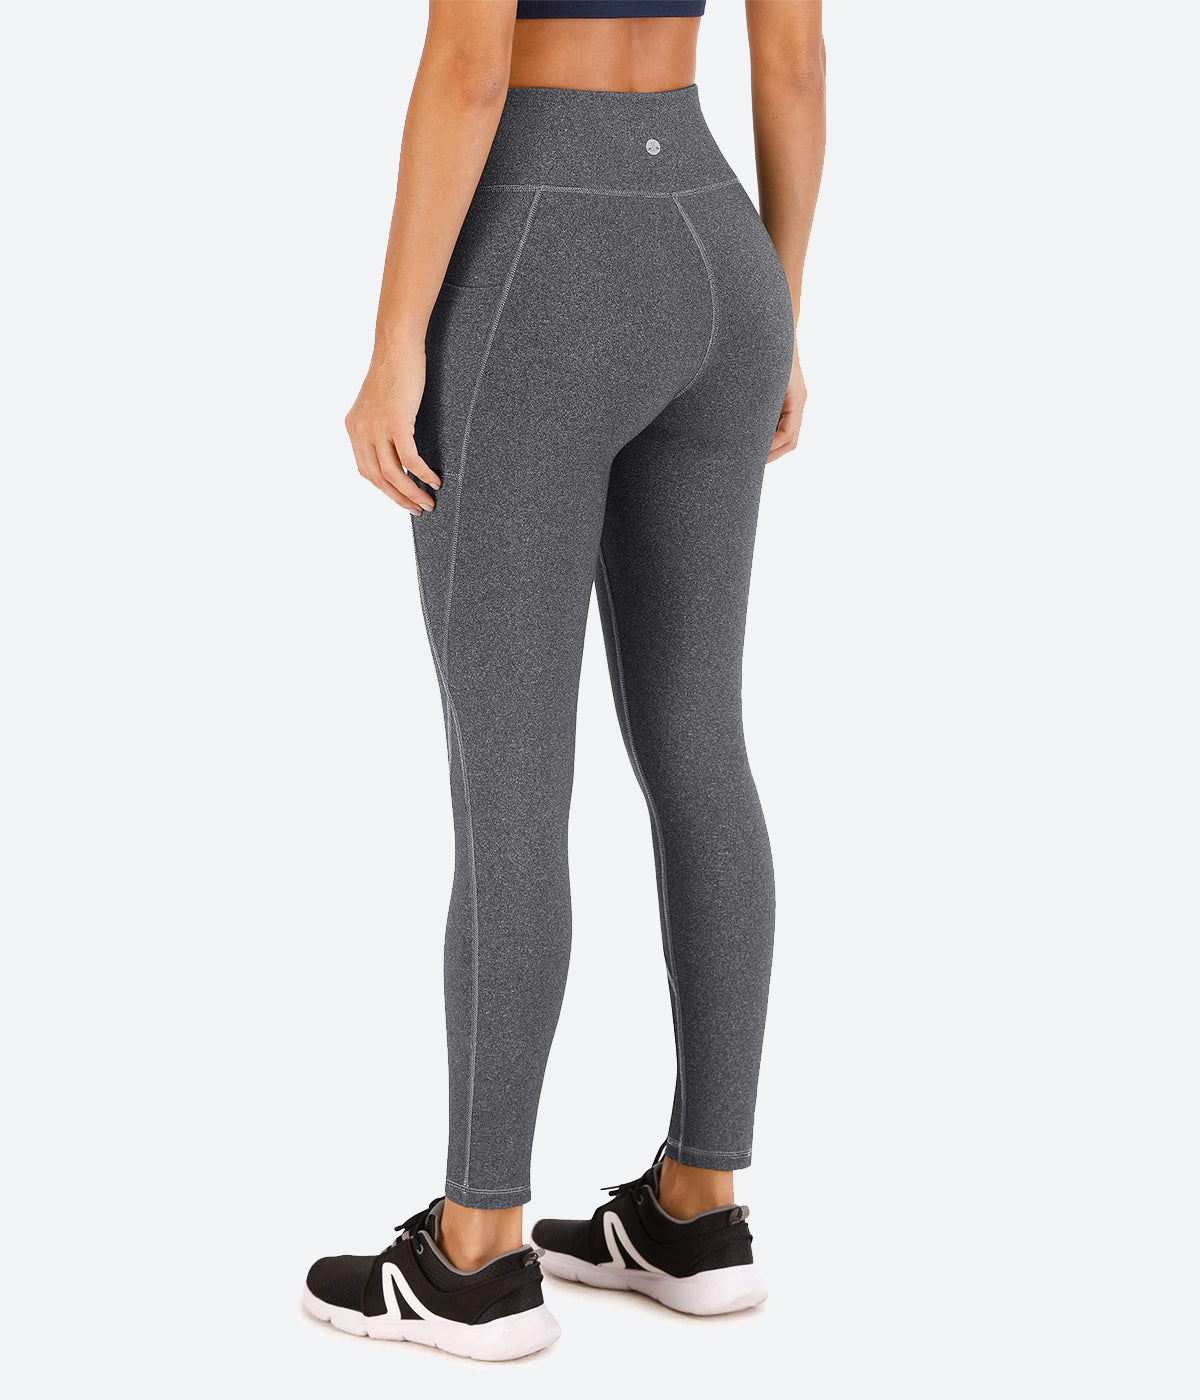 Heathyoga Yoga Pants with Pockets for Women High India